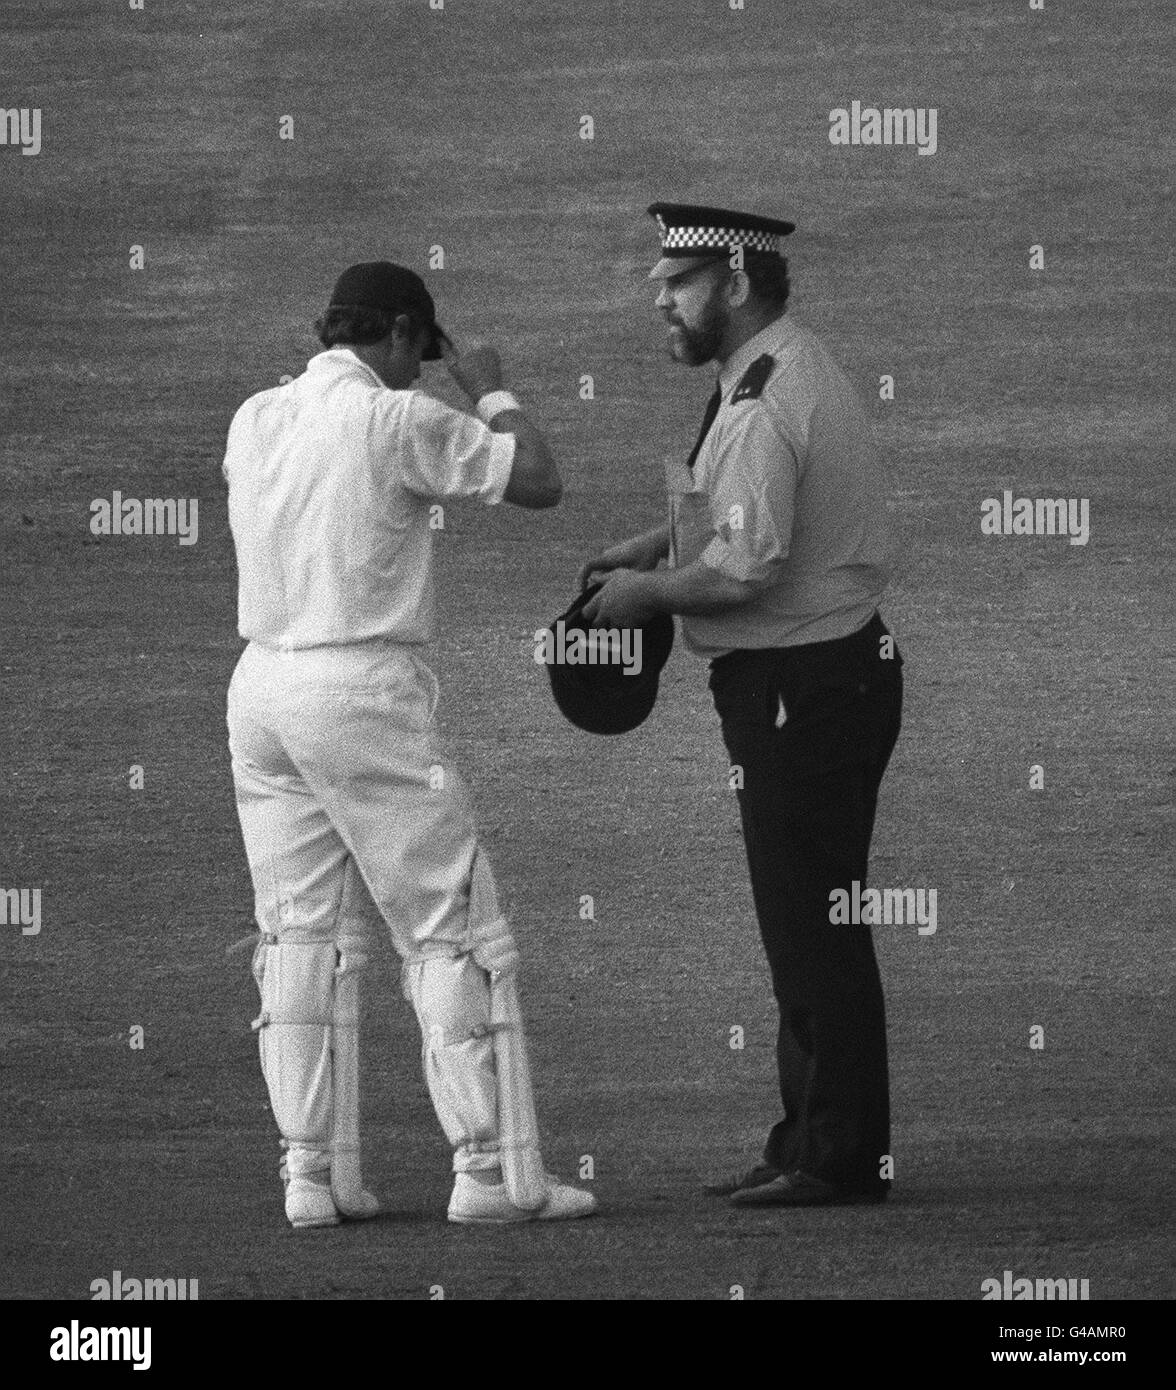 PA NEWS PHOTO 11/8/77 ENGLAND OPENER GEOFF BOYCOTT KNOCKED UP HIS 100TH CENTURY AT HEADINGLEY DURING THE FOURTH TEST AGAINST AUSTRALIA. HE GETS A REPLACEMENT CAP FROM A POLICEMAN AFTER LOSING HIS IN THE CROWD THAT ENGULFED HIM. A FAN BROUGHT BACK HIS ORIGINAL CAP BEFORE THE RESUMPTION OF PLAY AND BOYCOTT WENT ON TO 110 NOT OUT. Stock Photo